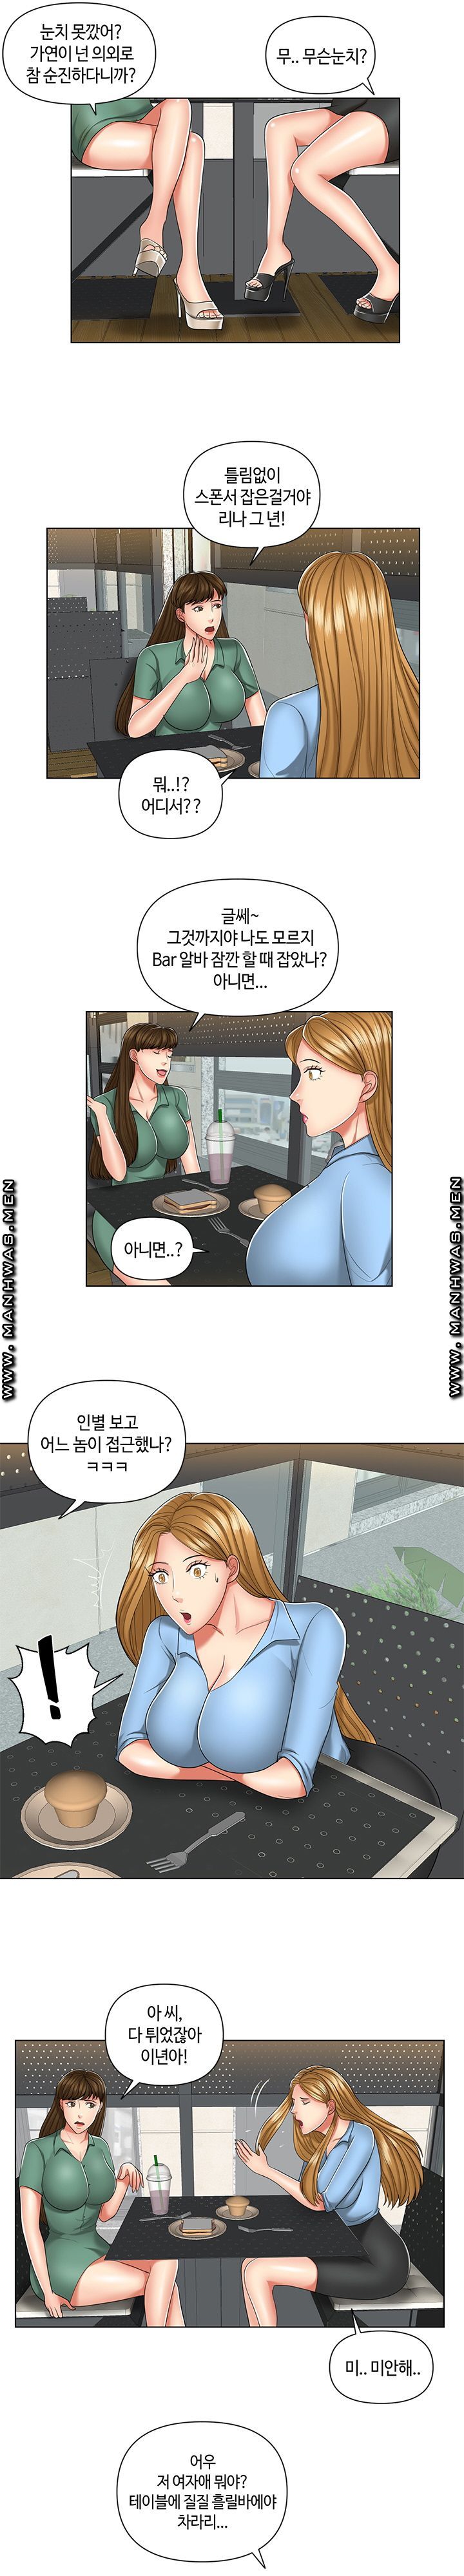 A Clandestine Deal Raw - Chapter 7 Page 9